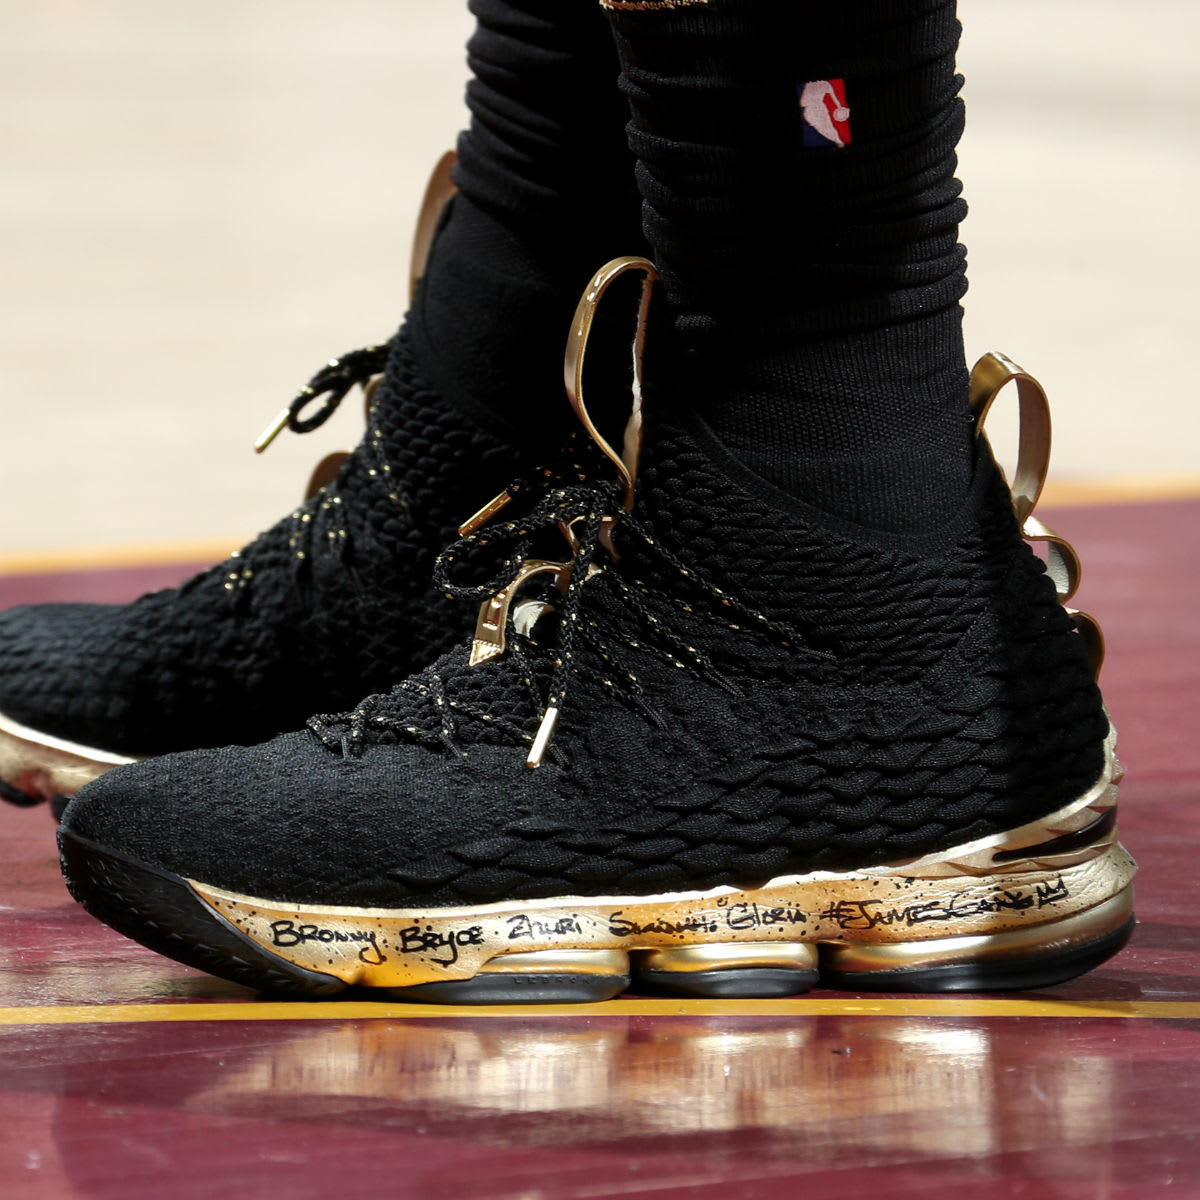 lebron james gold and black shoes